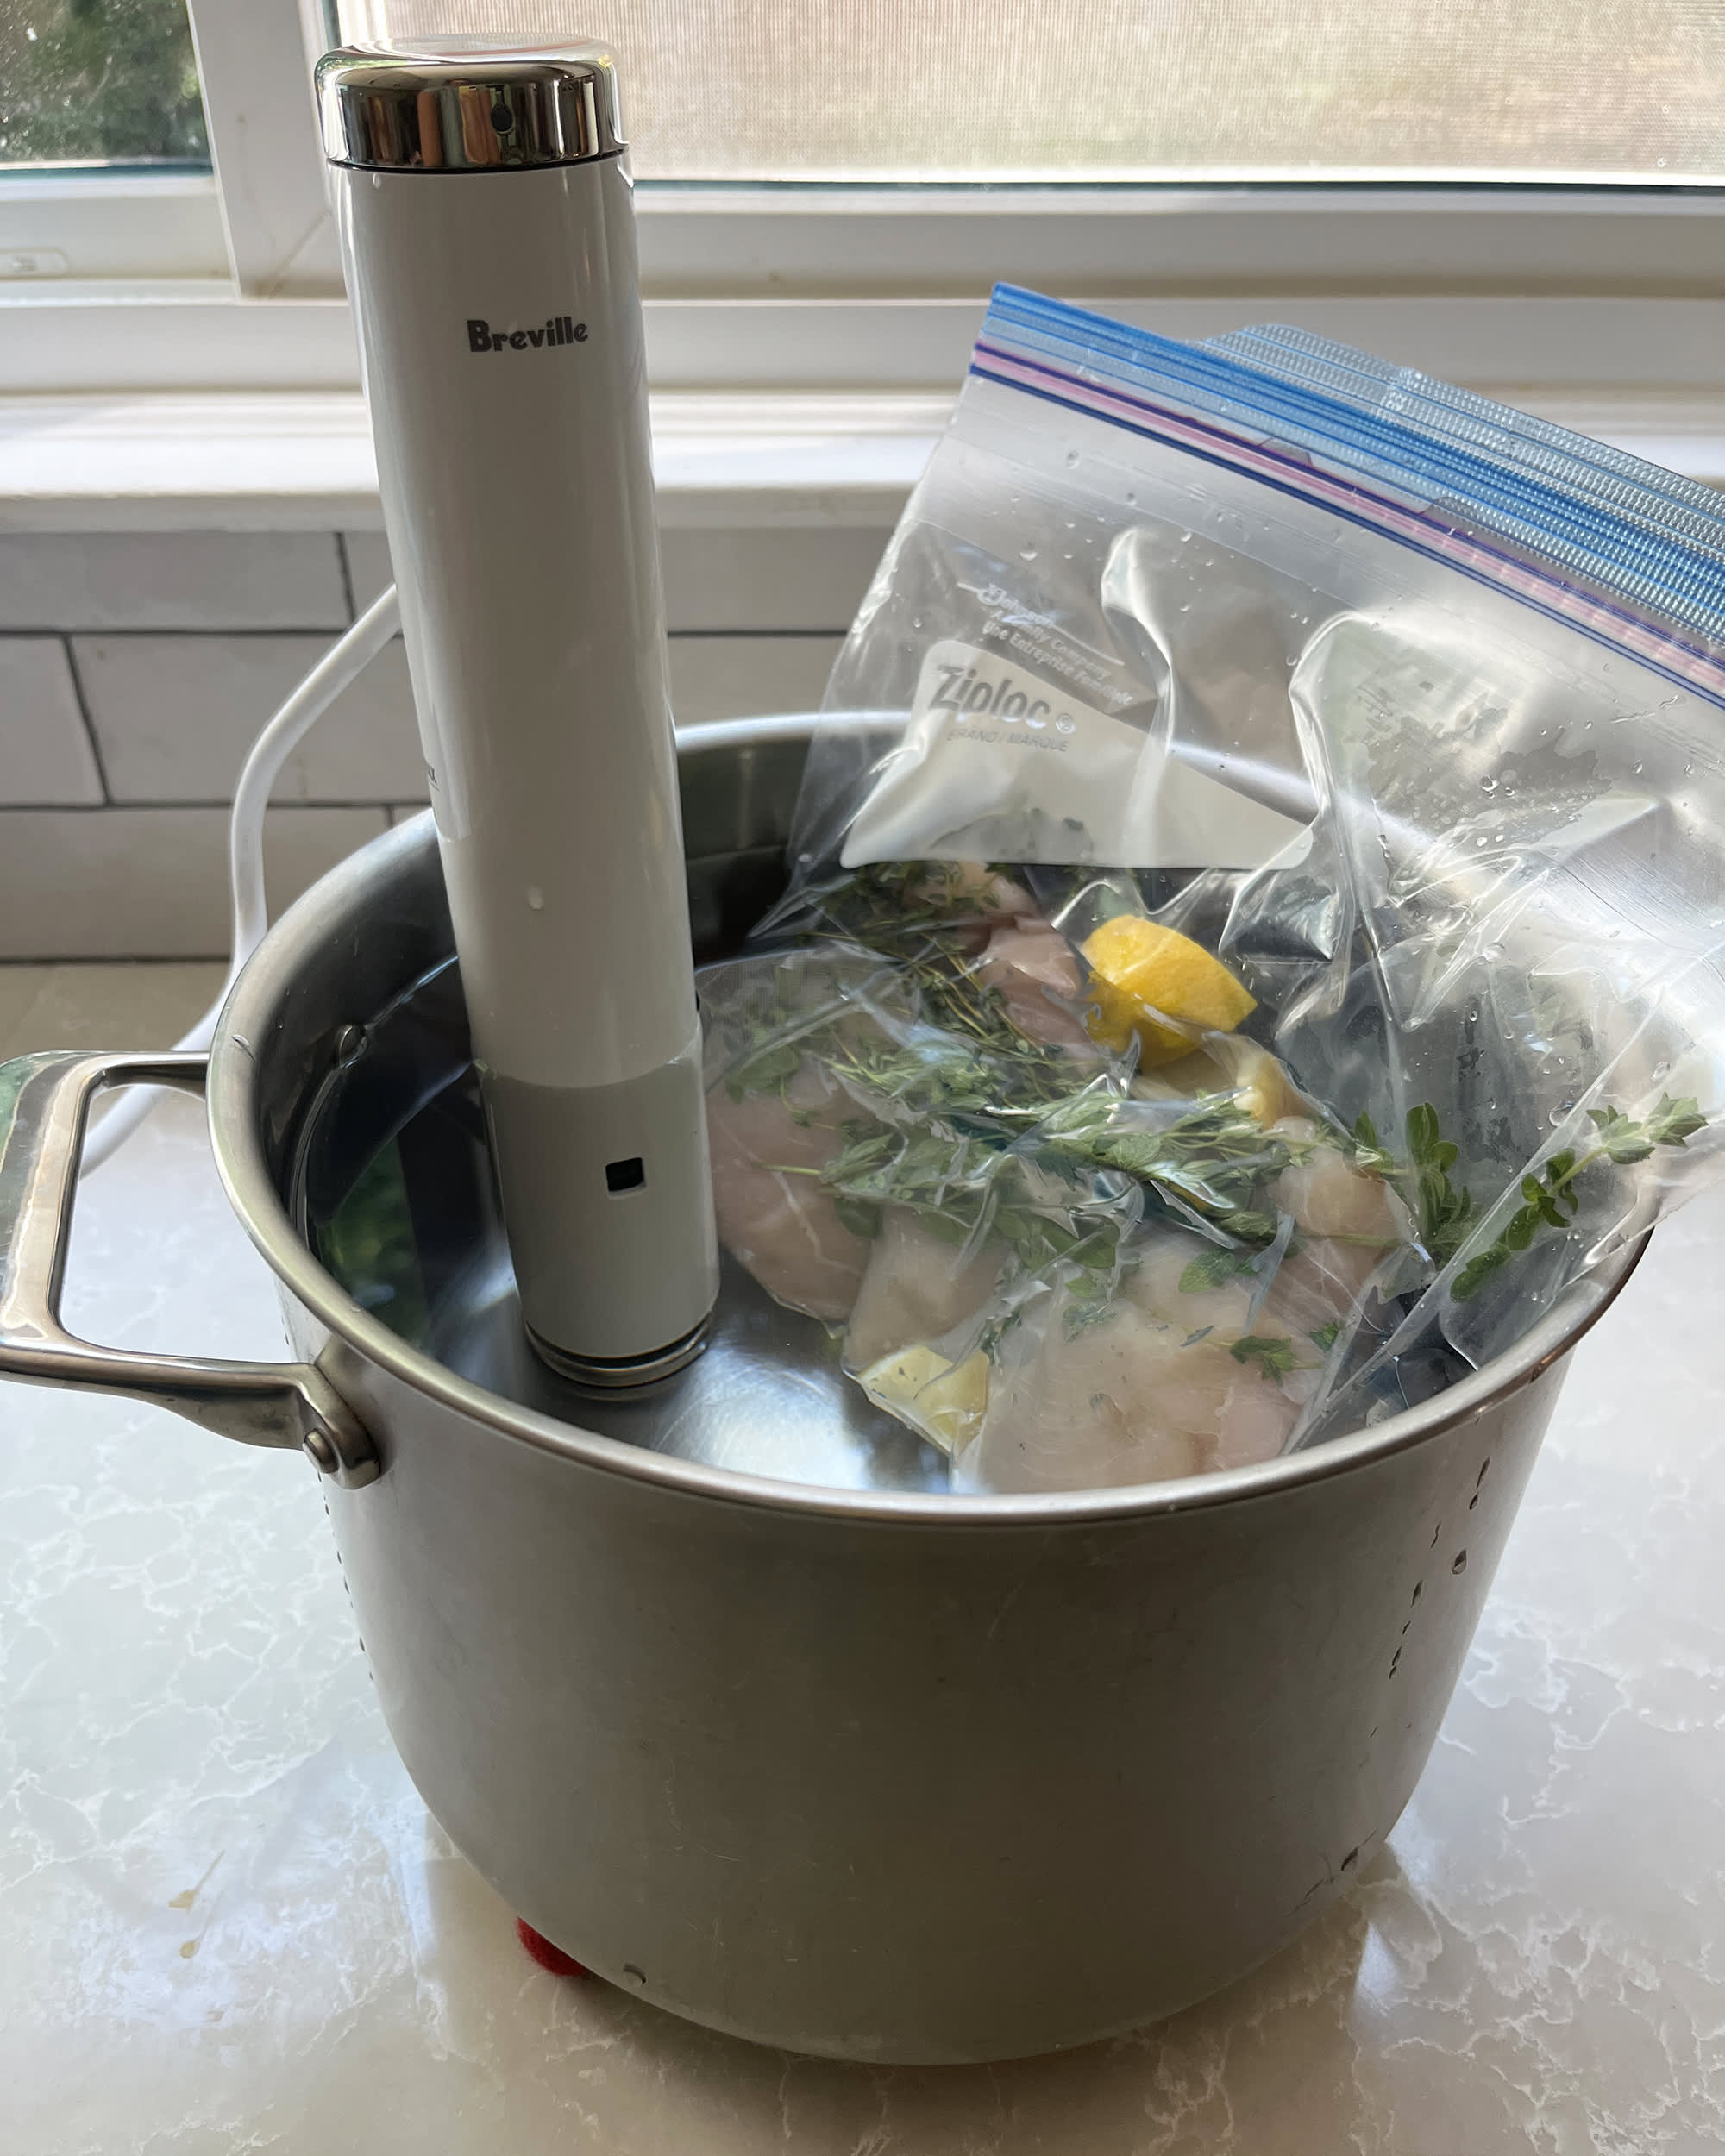 Breville Joule Turbo review: sous vide with speed - The Verge